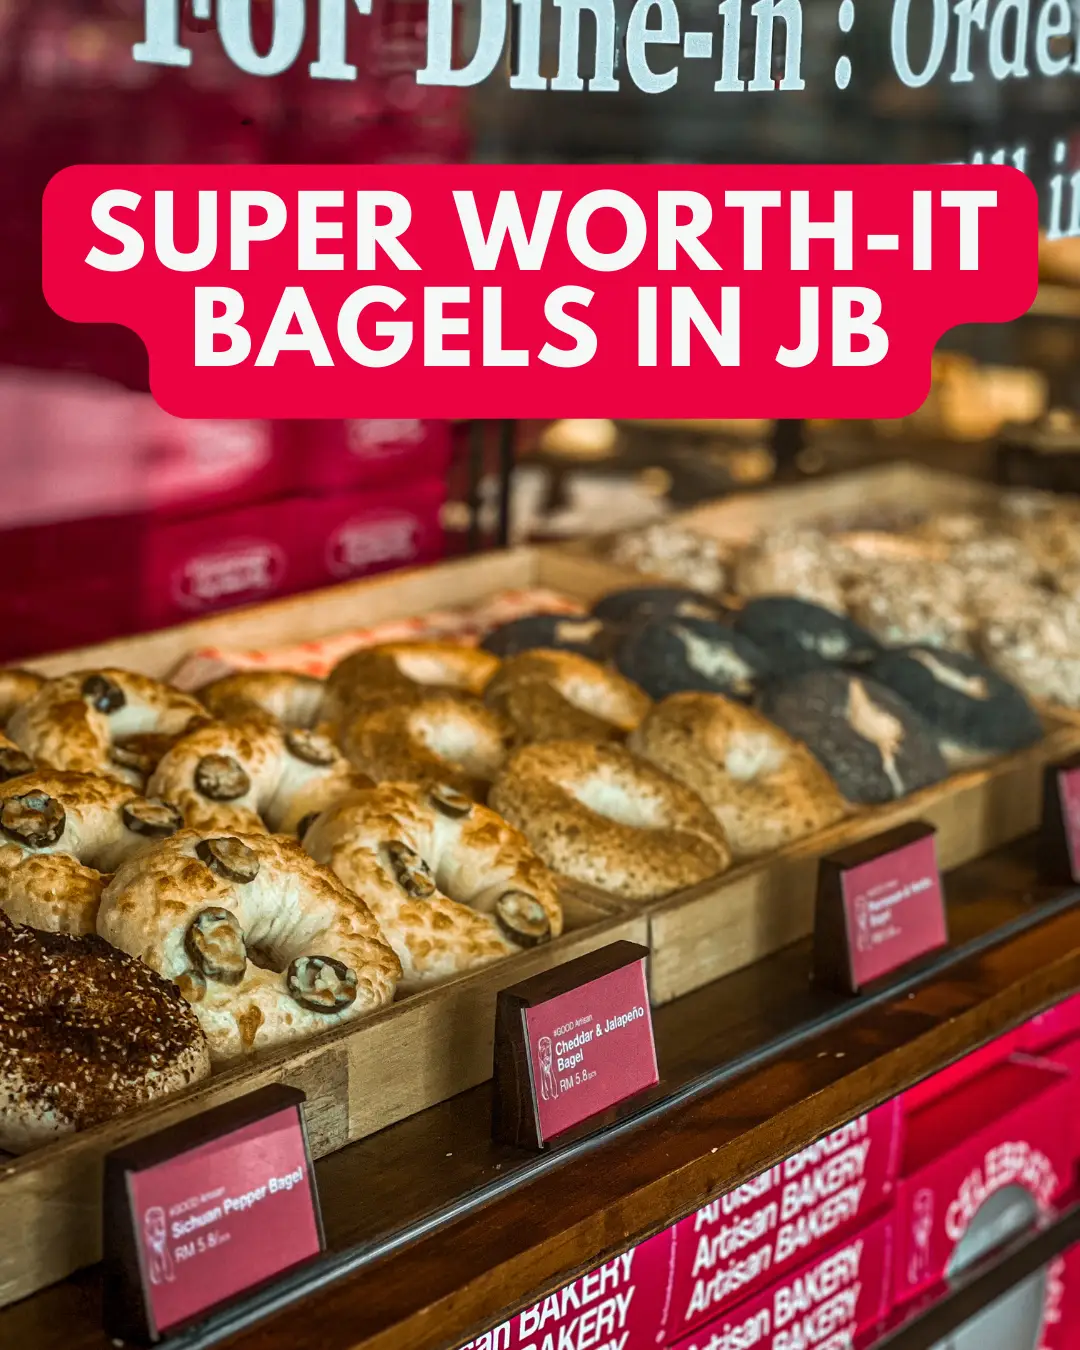 Yummy Bagels For Only Less Than $2 Each!? 🙋🏻‍♀️🙋🏻🙋🏻‍♂️'s images